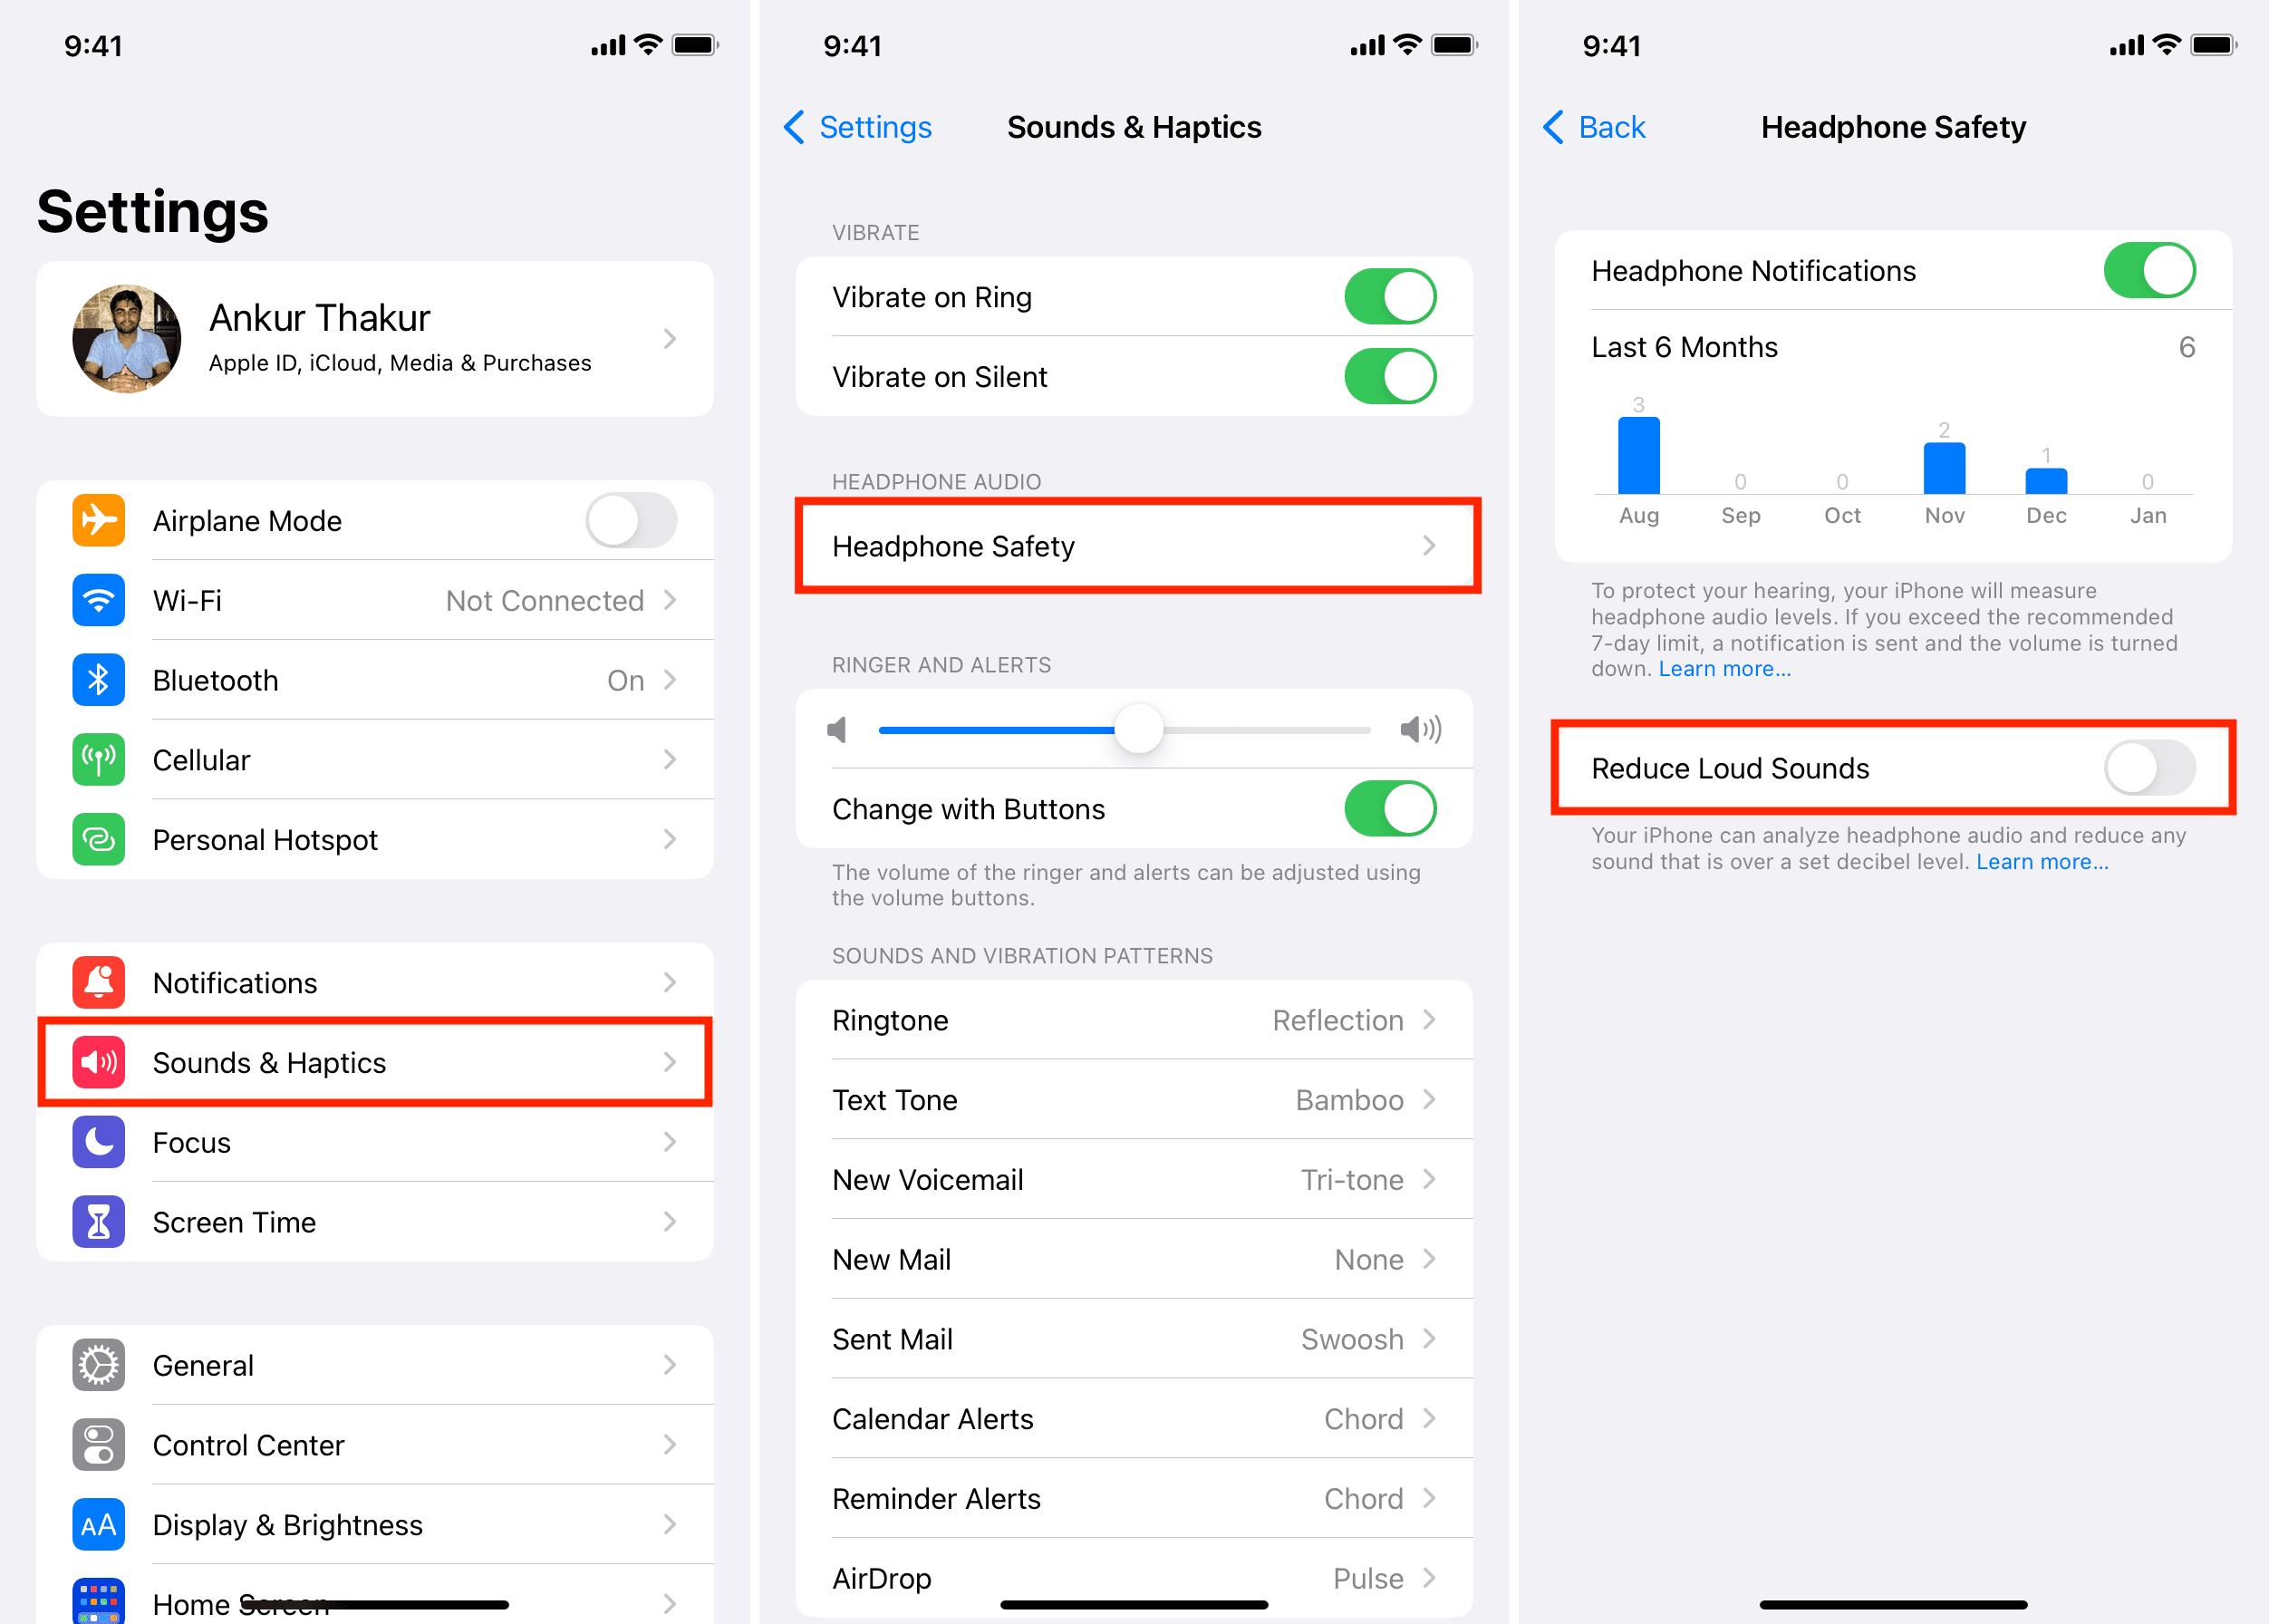 Turn off Reduce Loud Sounds on iPhone to increase AirPods volume